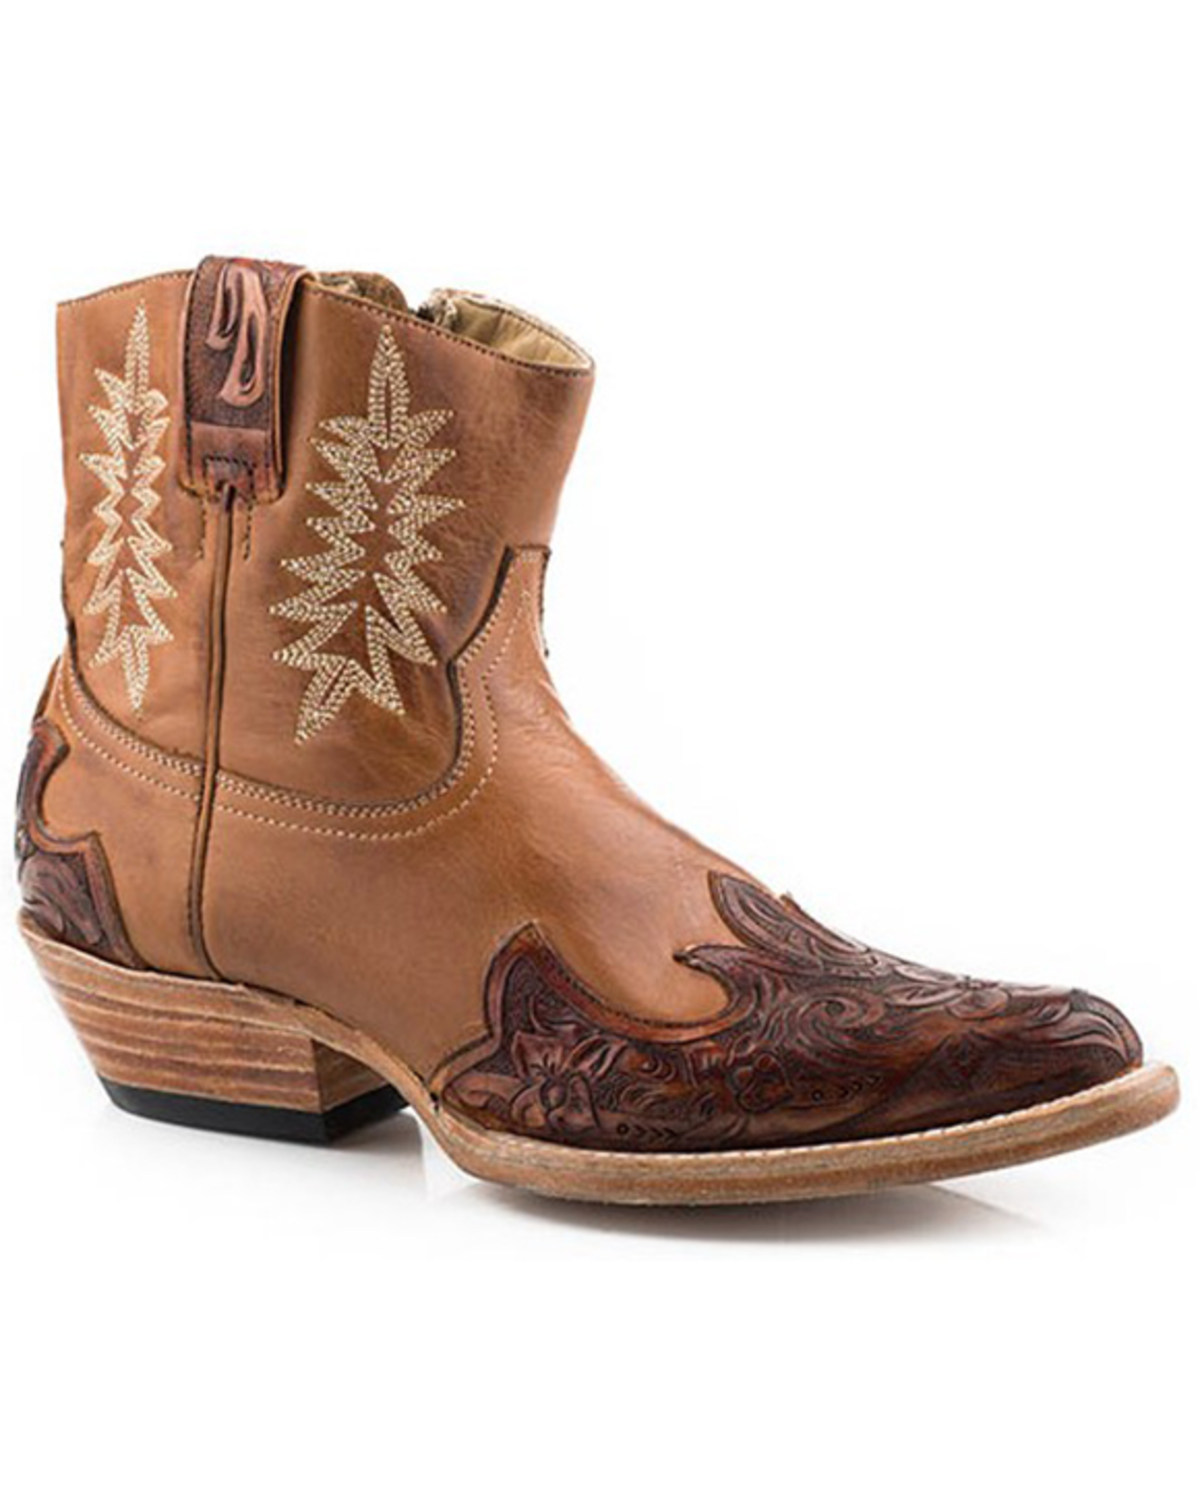 Stetson's Women's Tobacco Western Fashion Booties - Pointed Toe